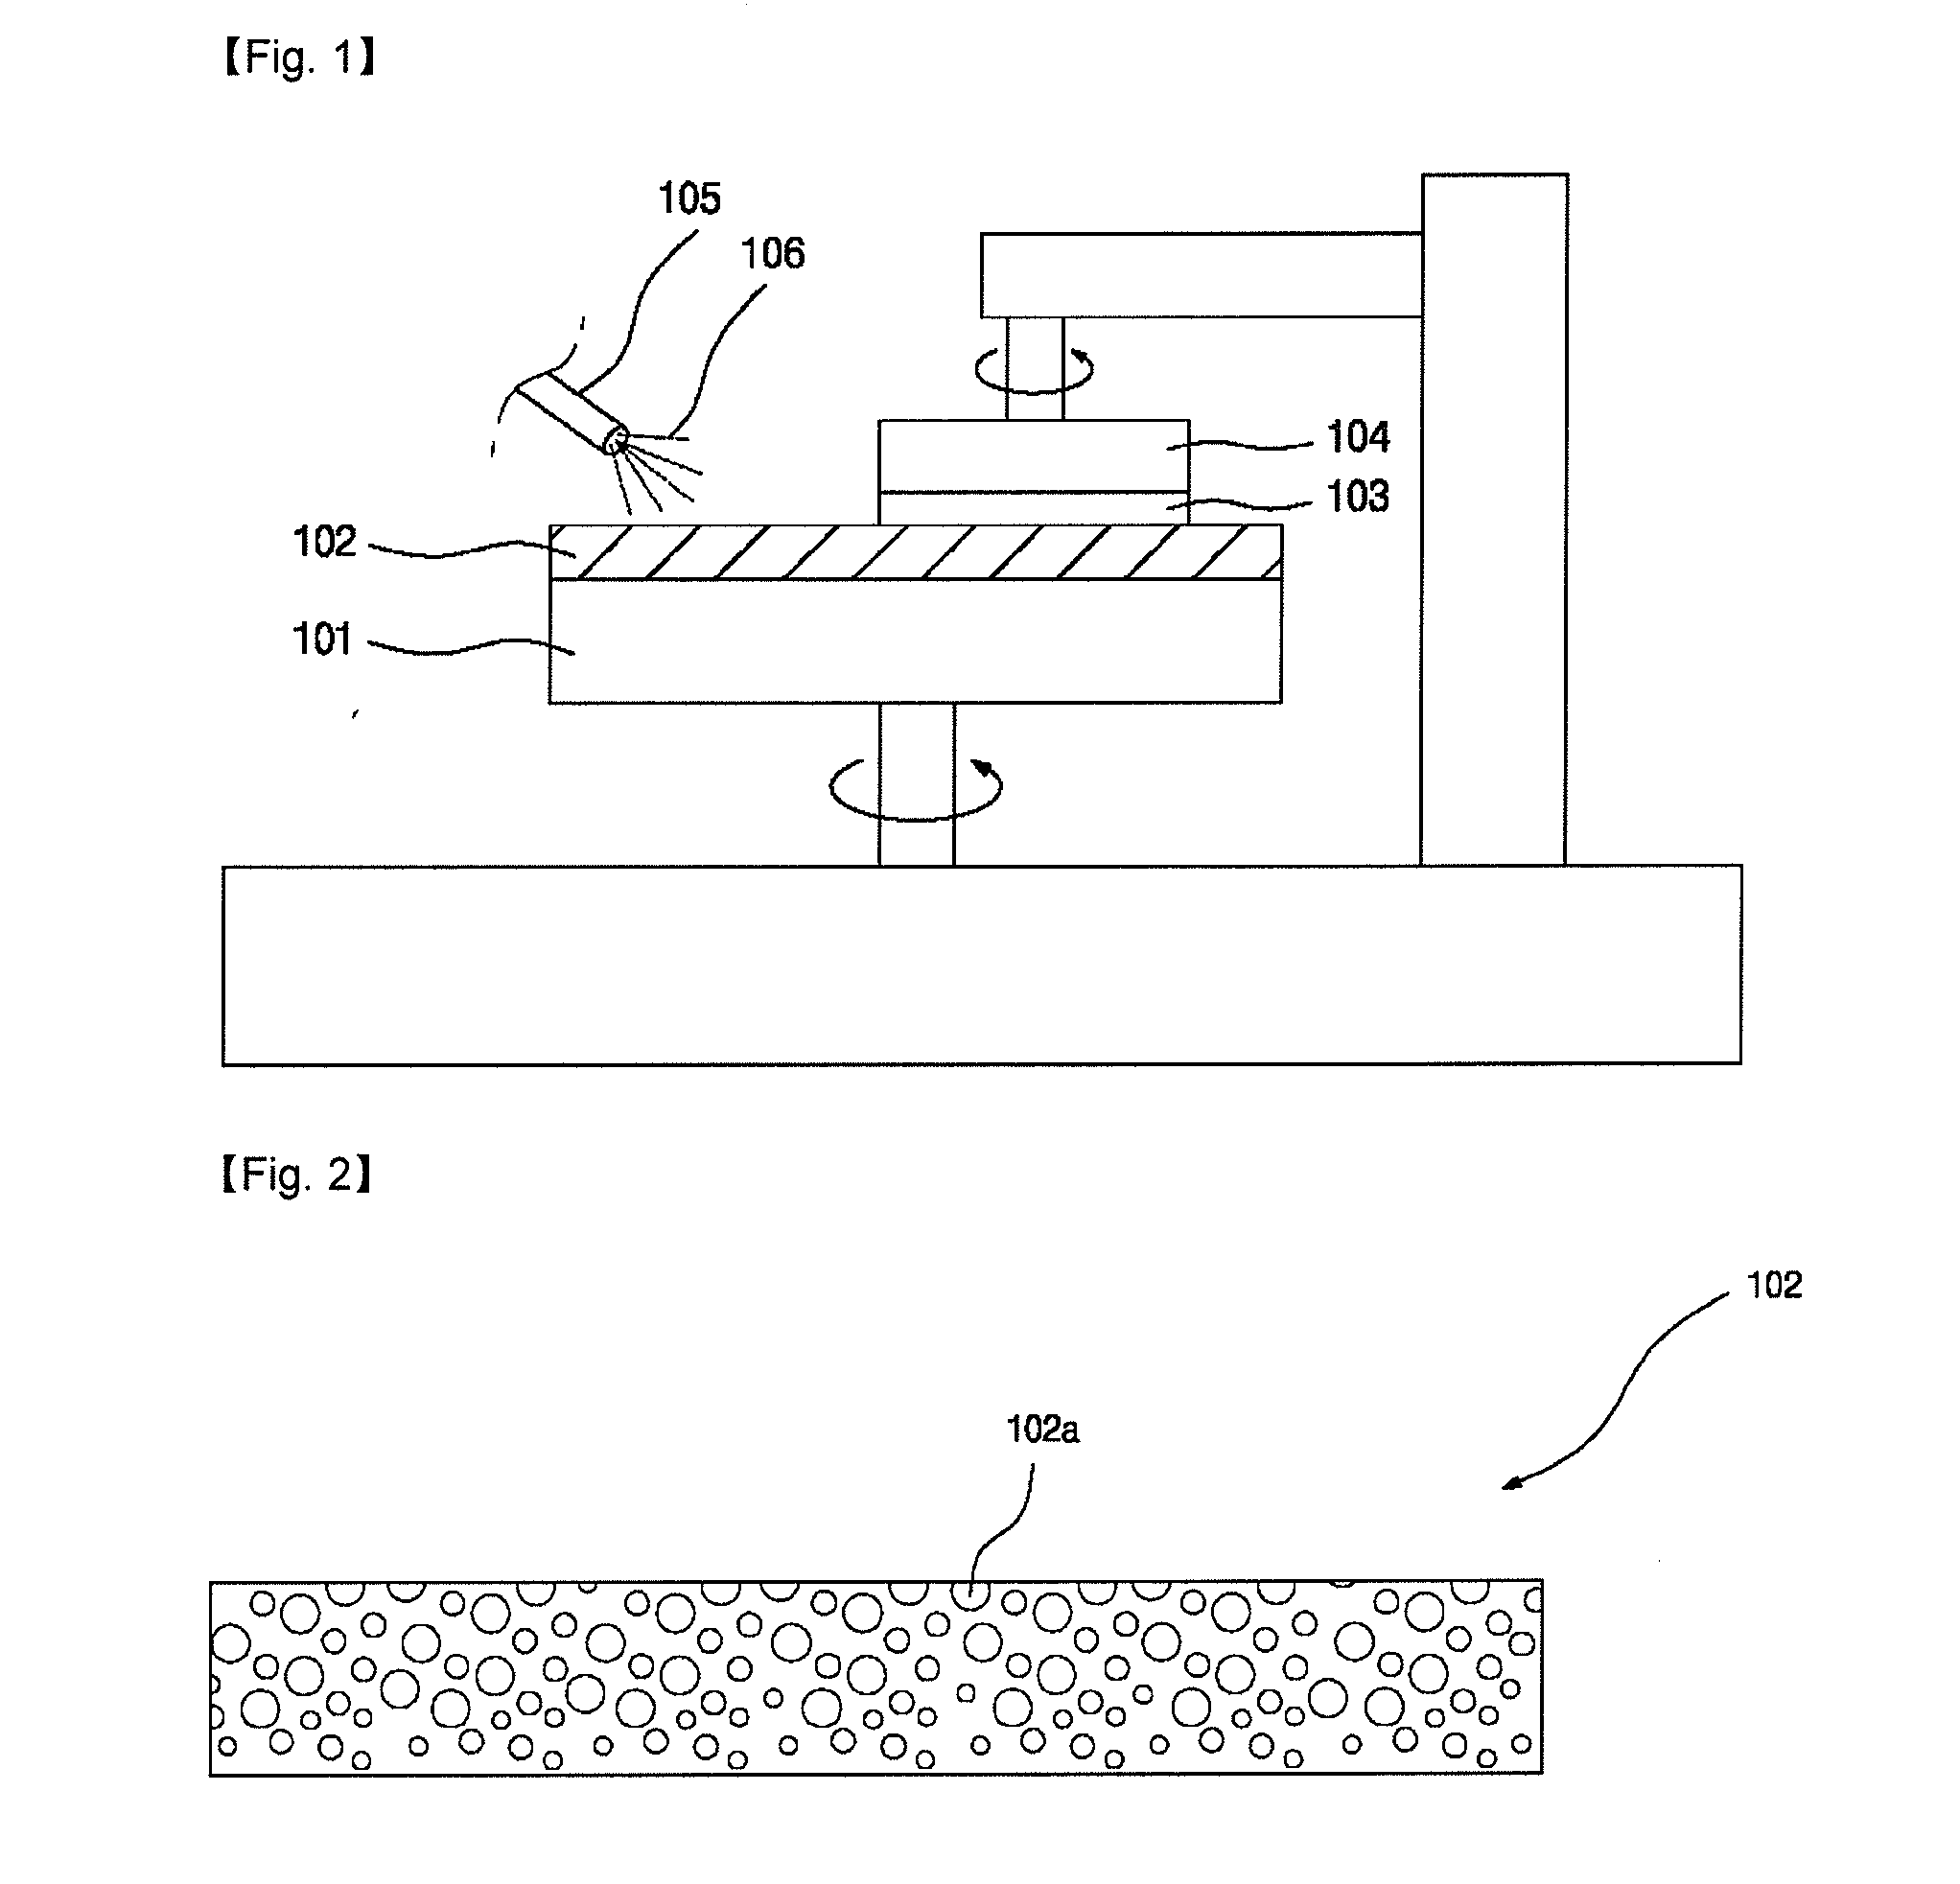 Cmp polishing pad having pores formed therein, and method for manufacturing same